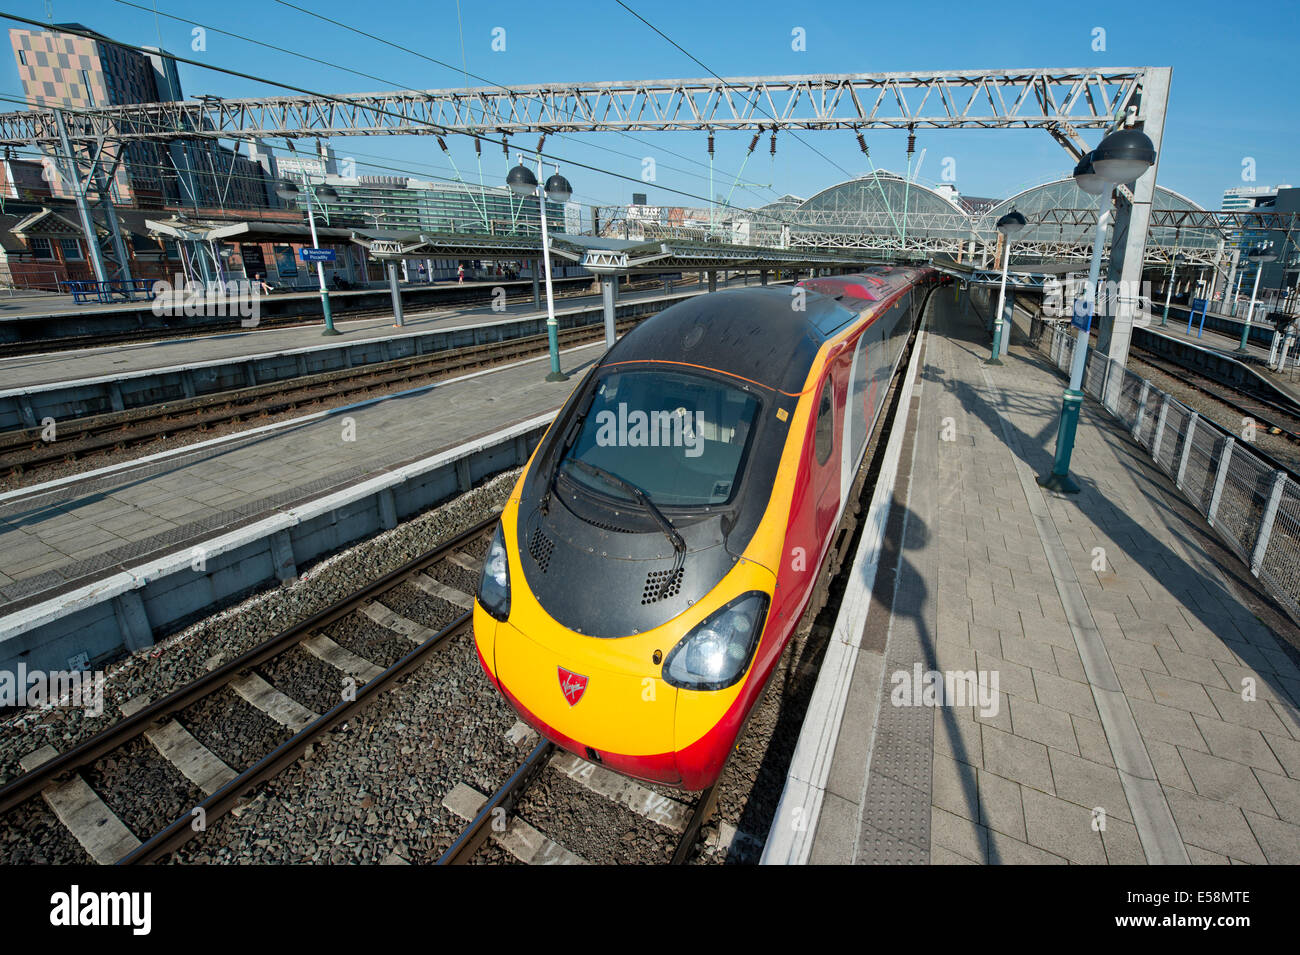 A Virgin Class 390 Pendolino train in the platform of Manchester Piccadilly Rail Station. Stock Photo